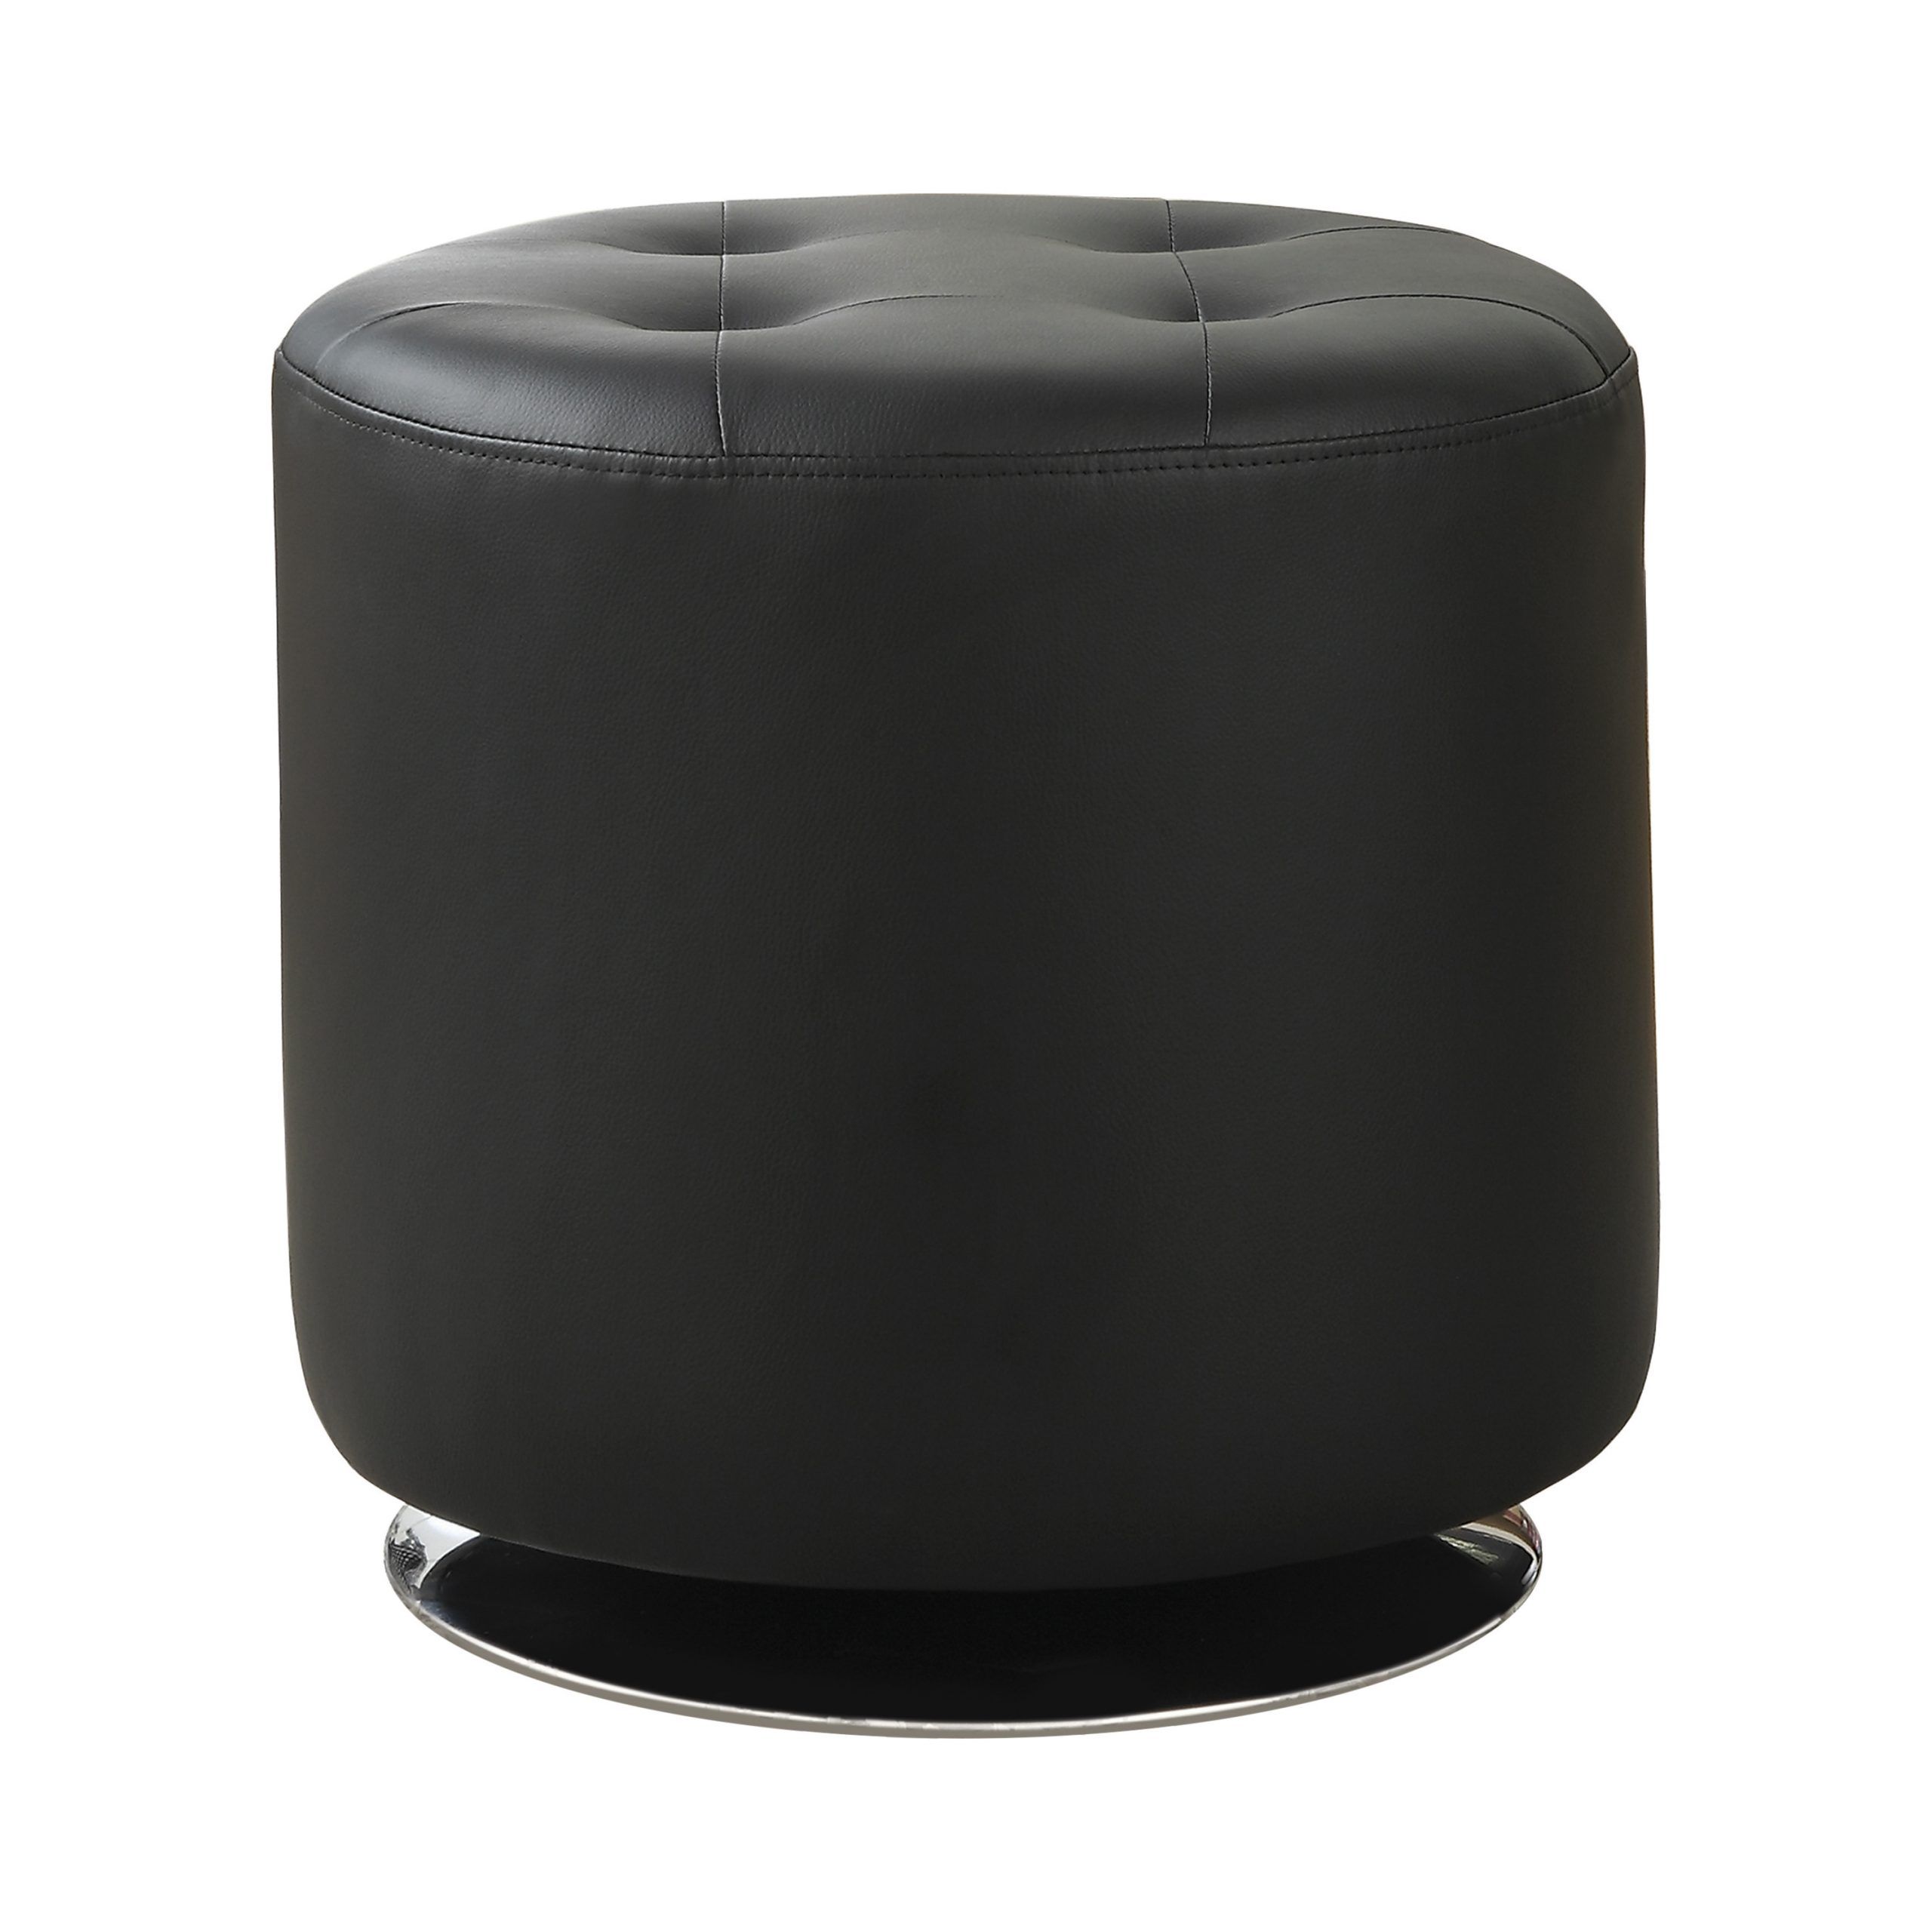 Round Upholstered Ottoman Black – Coaster Fine Furniture Pertaining To Round Black Tasseled Ottomans (View 2 of 20)